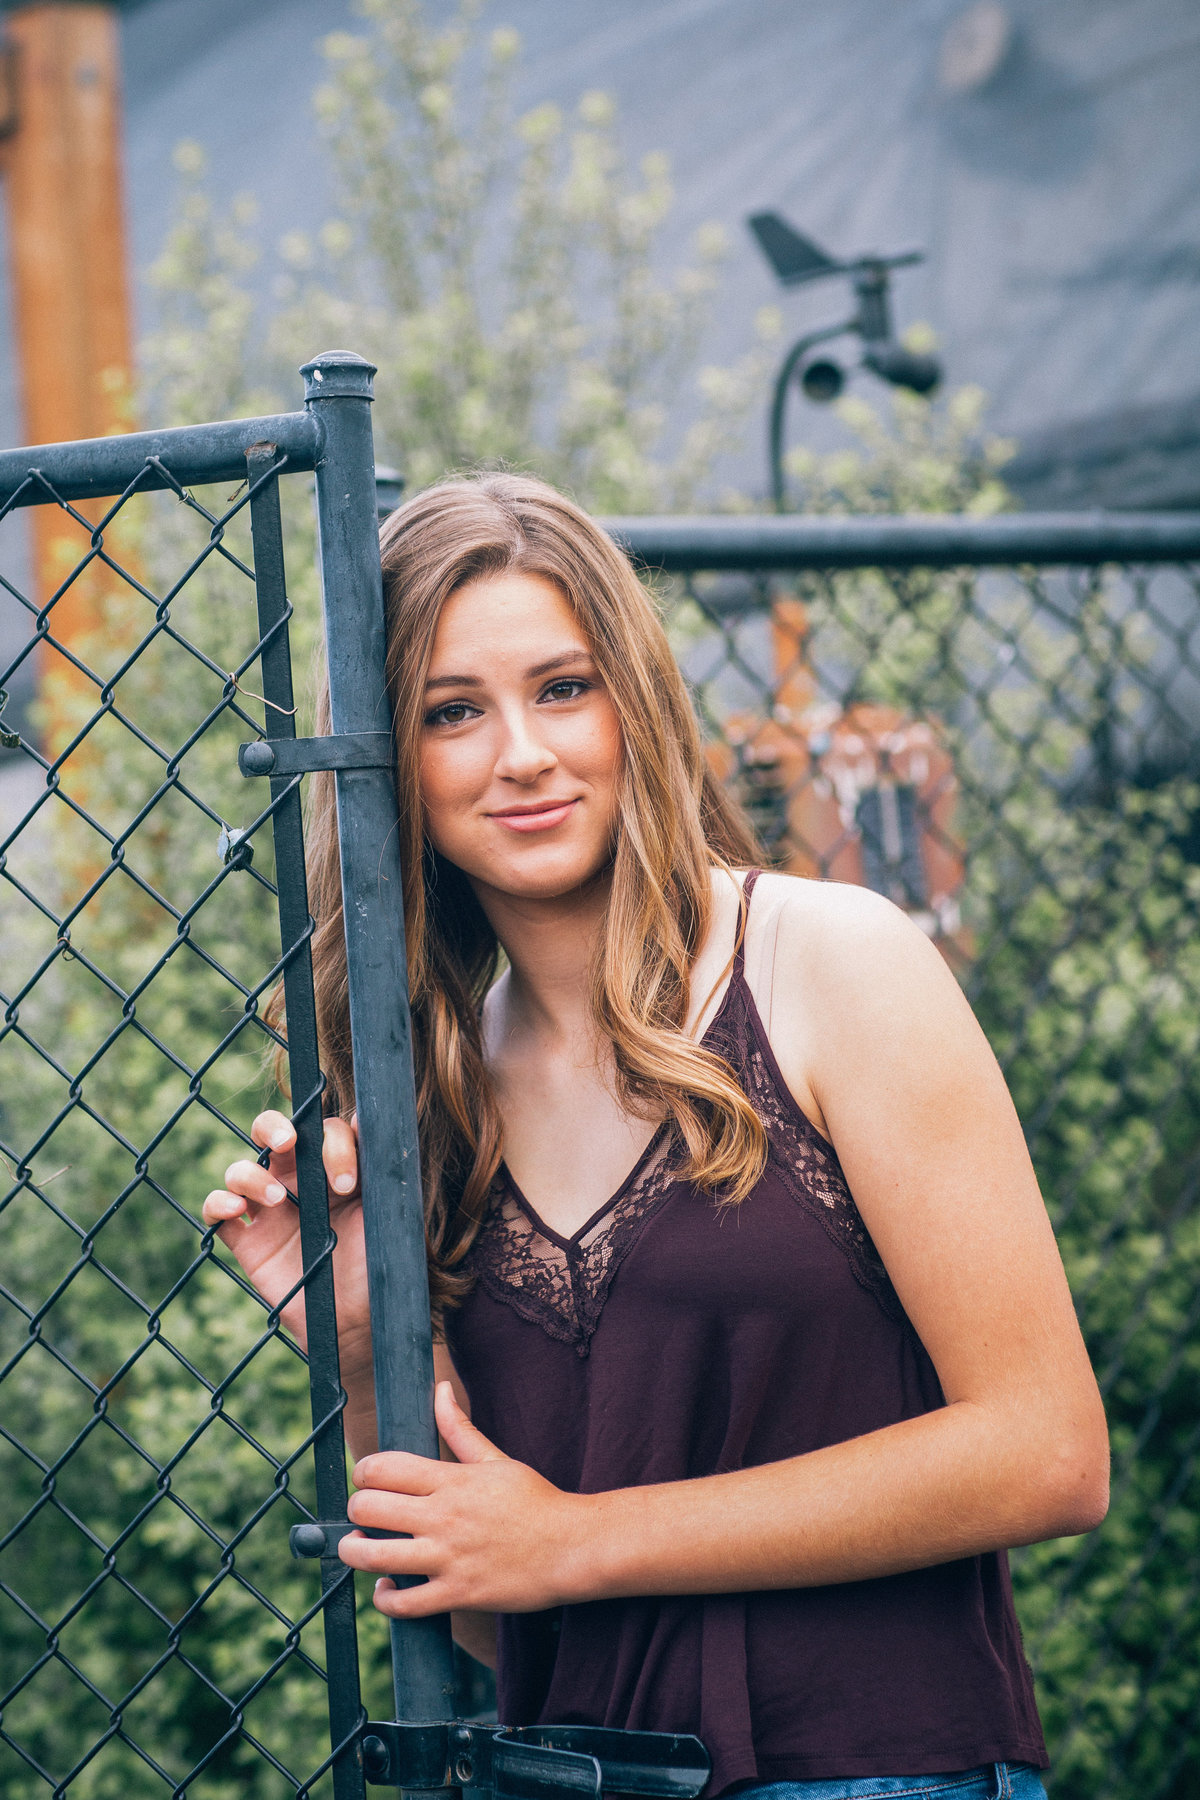 Lake Oswego Senior pictures at Park with Fence